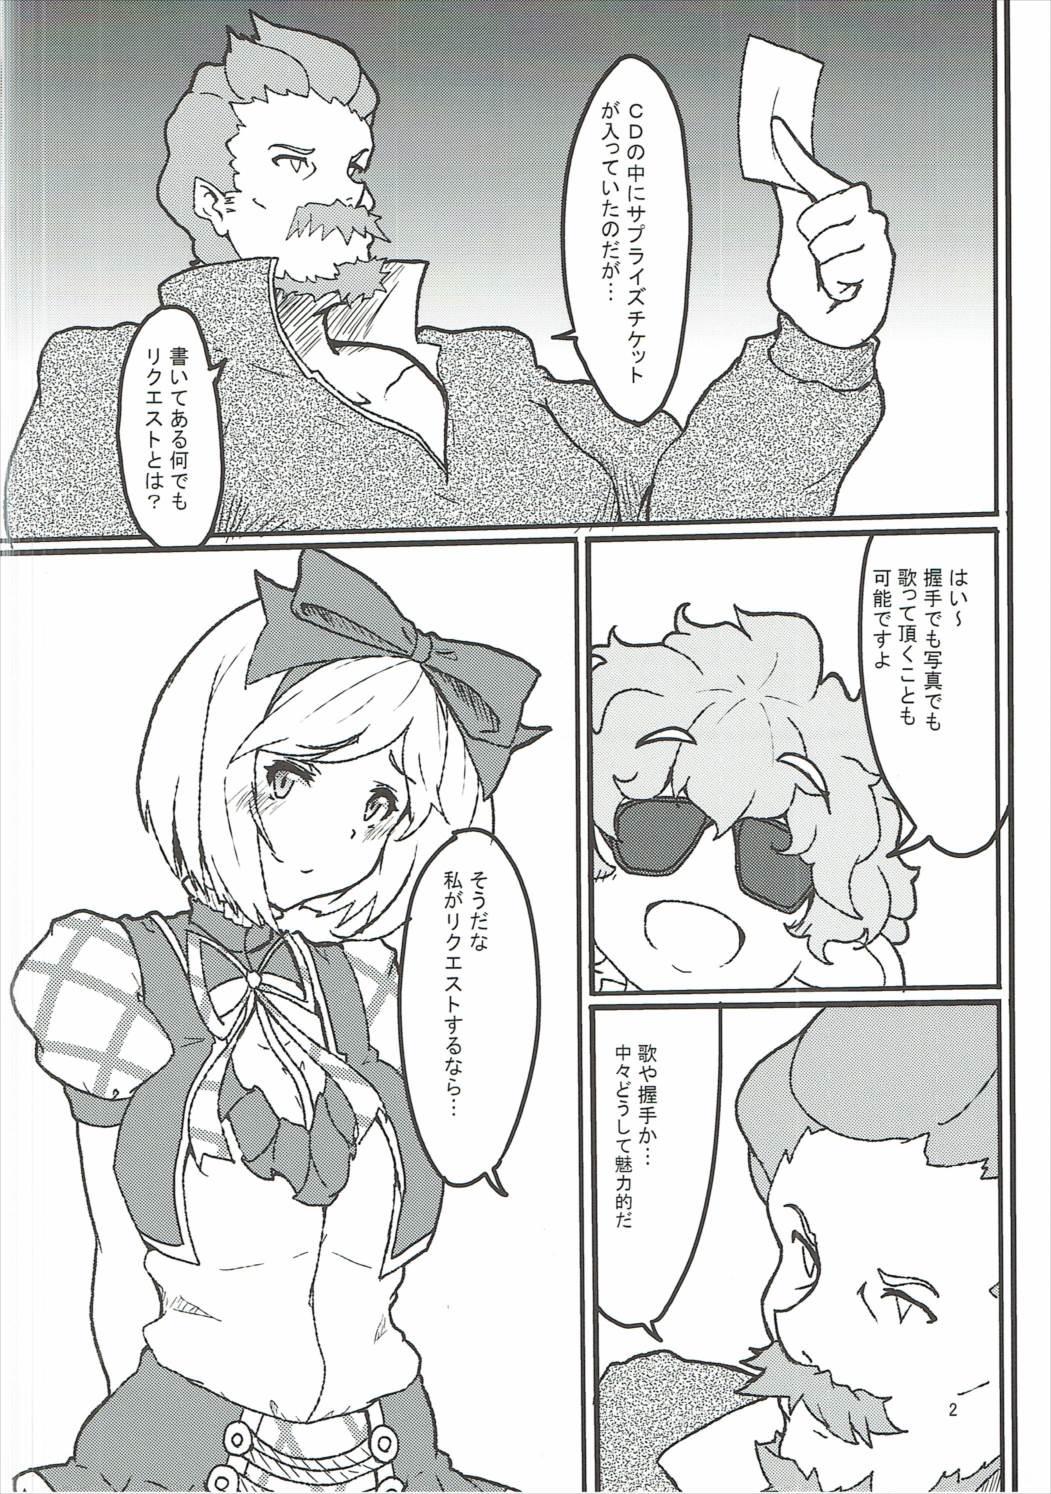 Butts Surprise Ticket - Granblue fantasy Stroking - Page 3